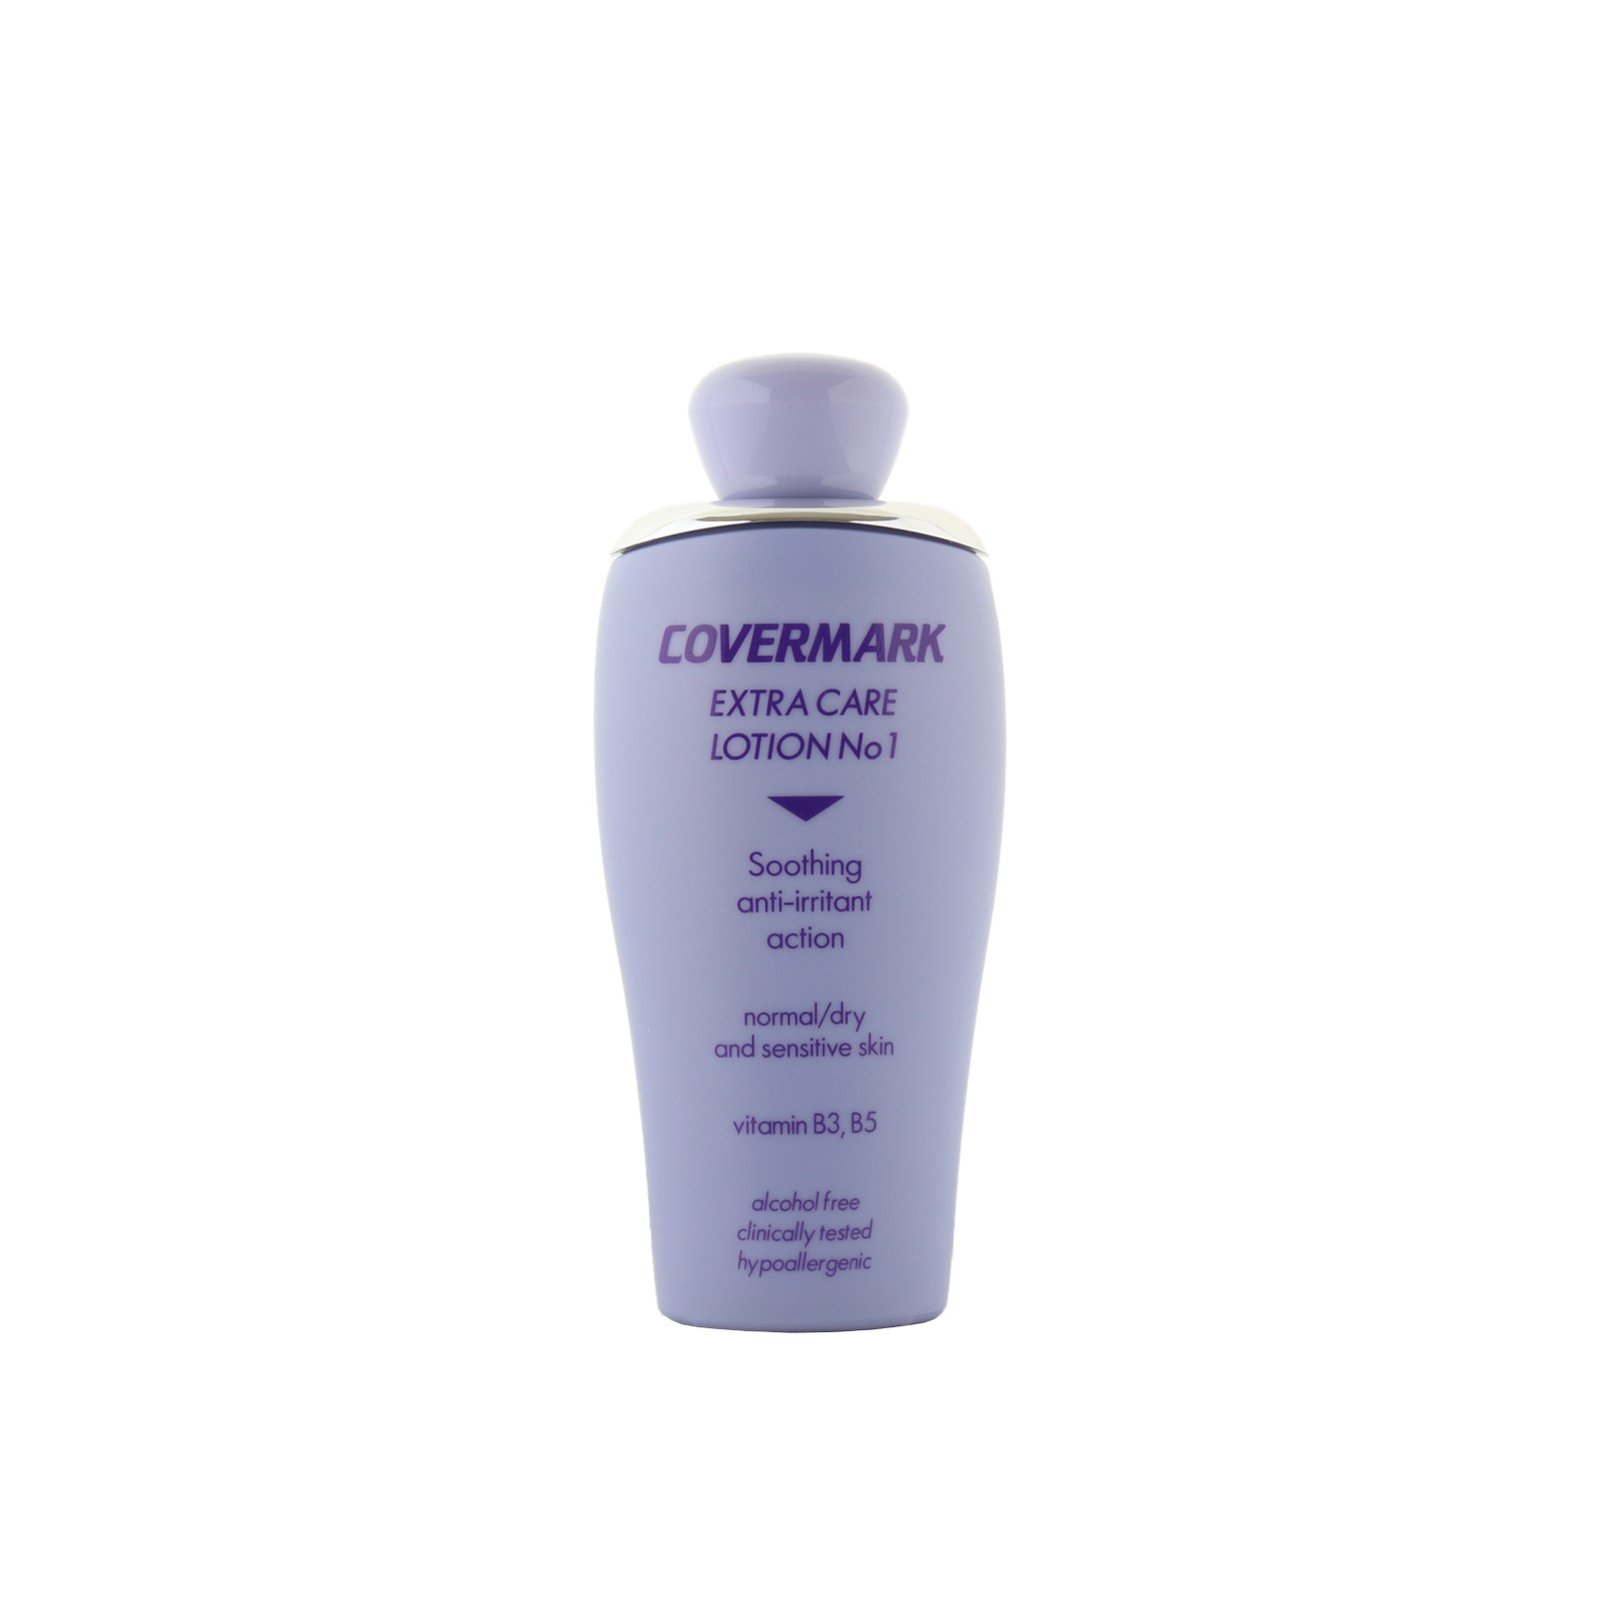 Covermark Extra Care Lotion No1 Normal/Dry And Sensitive Skin 200ml (6.76 fl oz)